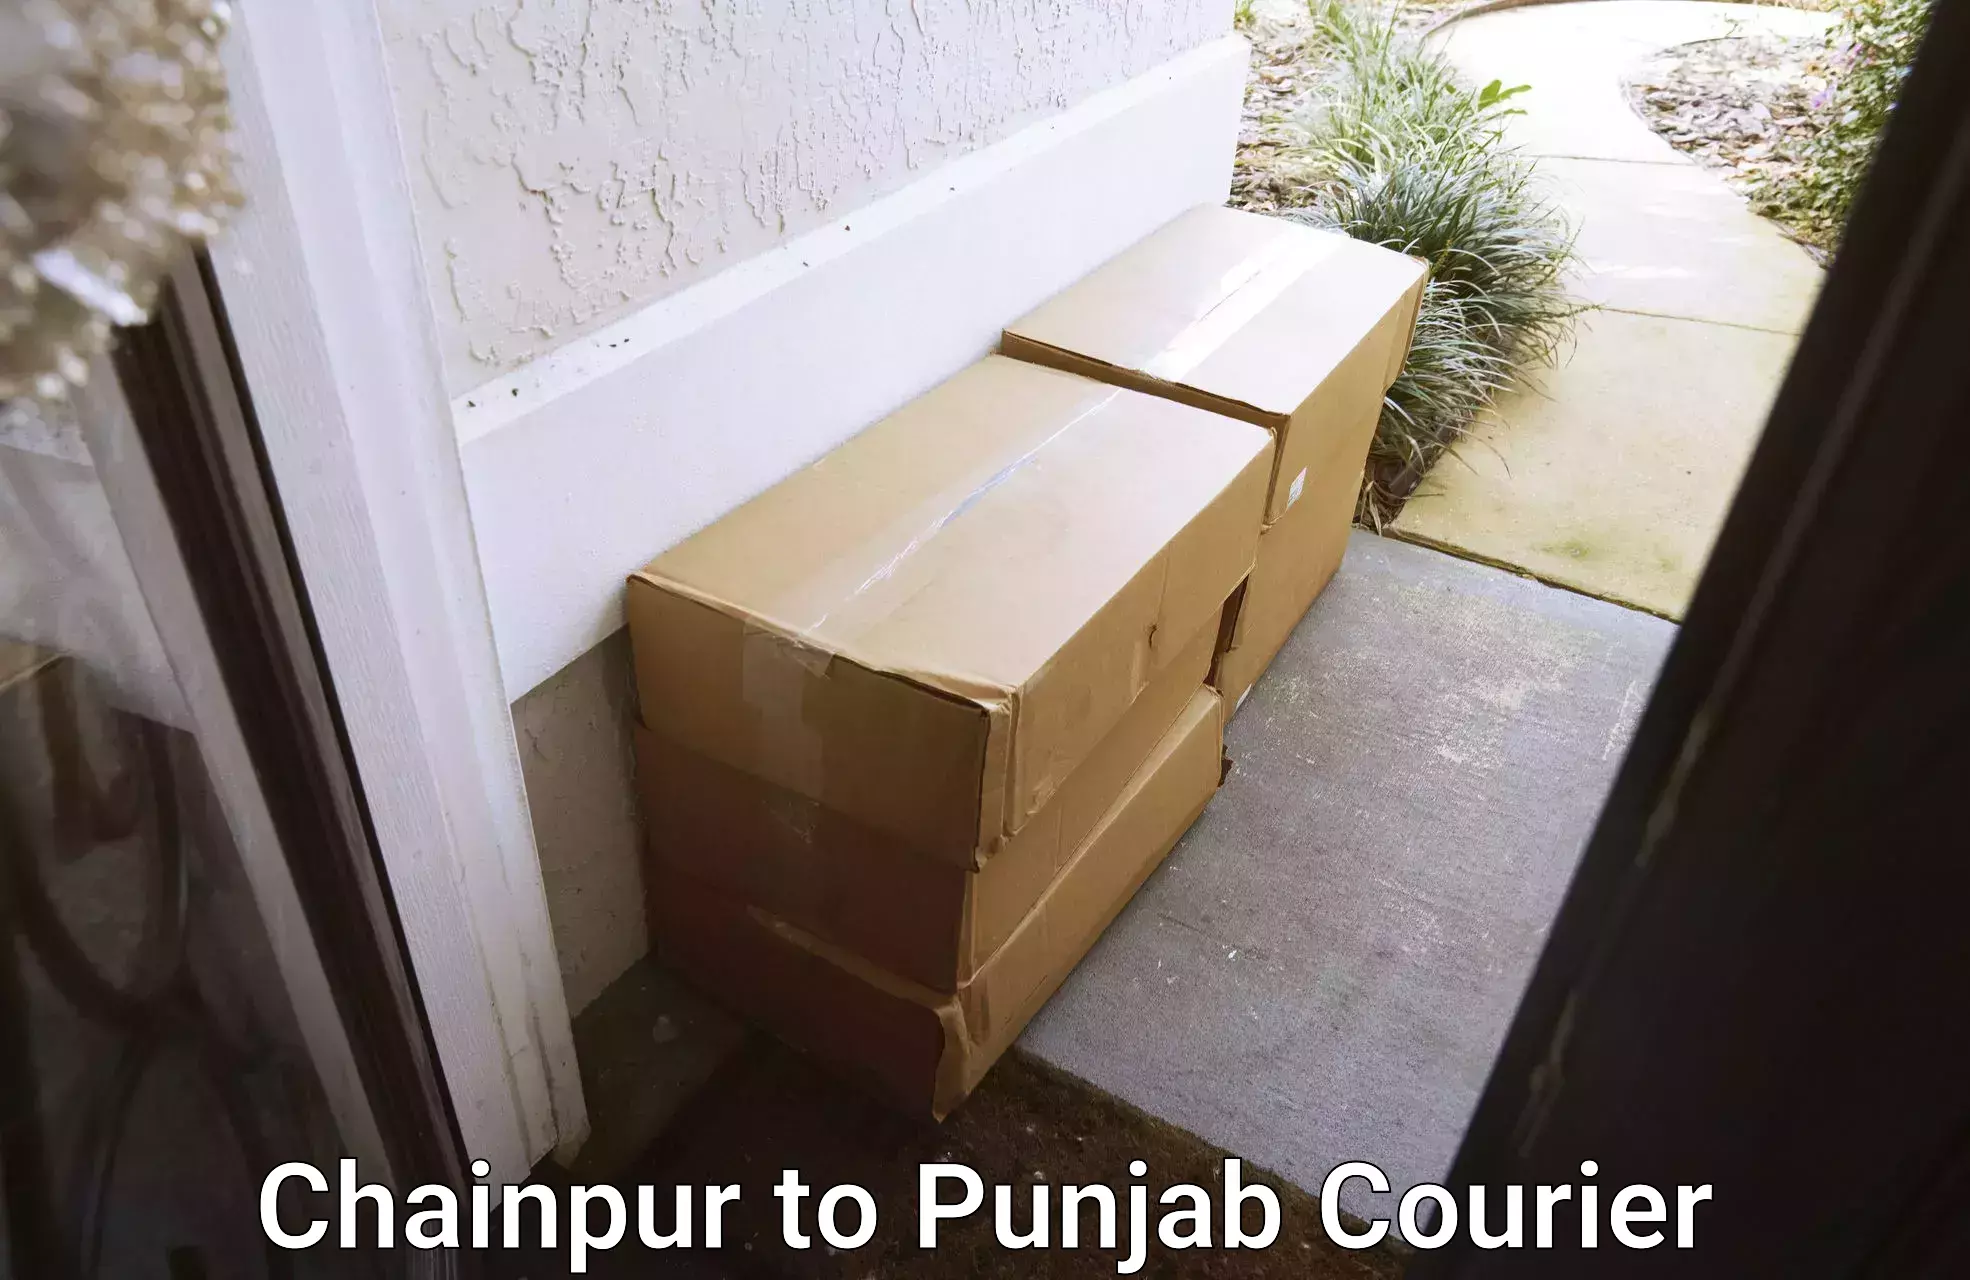 Professional moving company Chainpur to Rupnagar